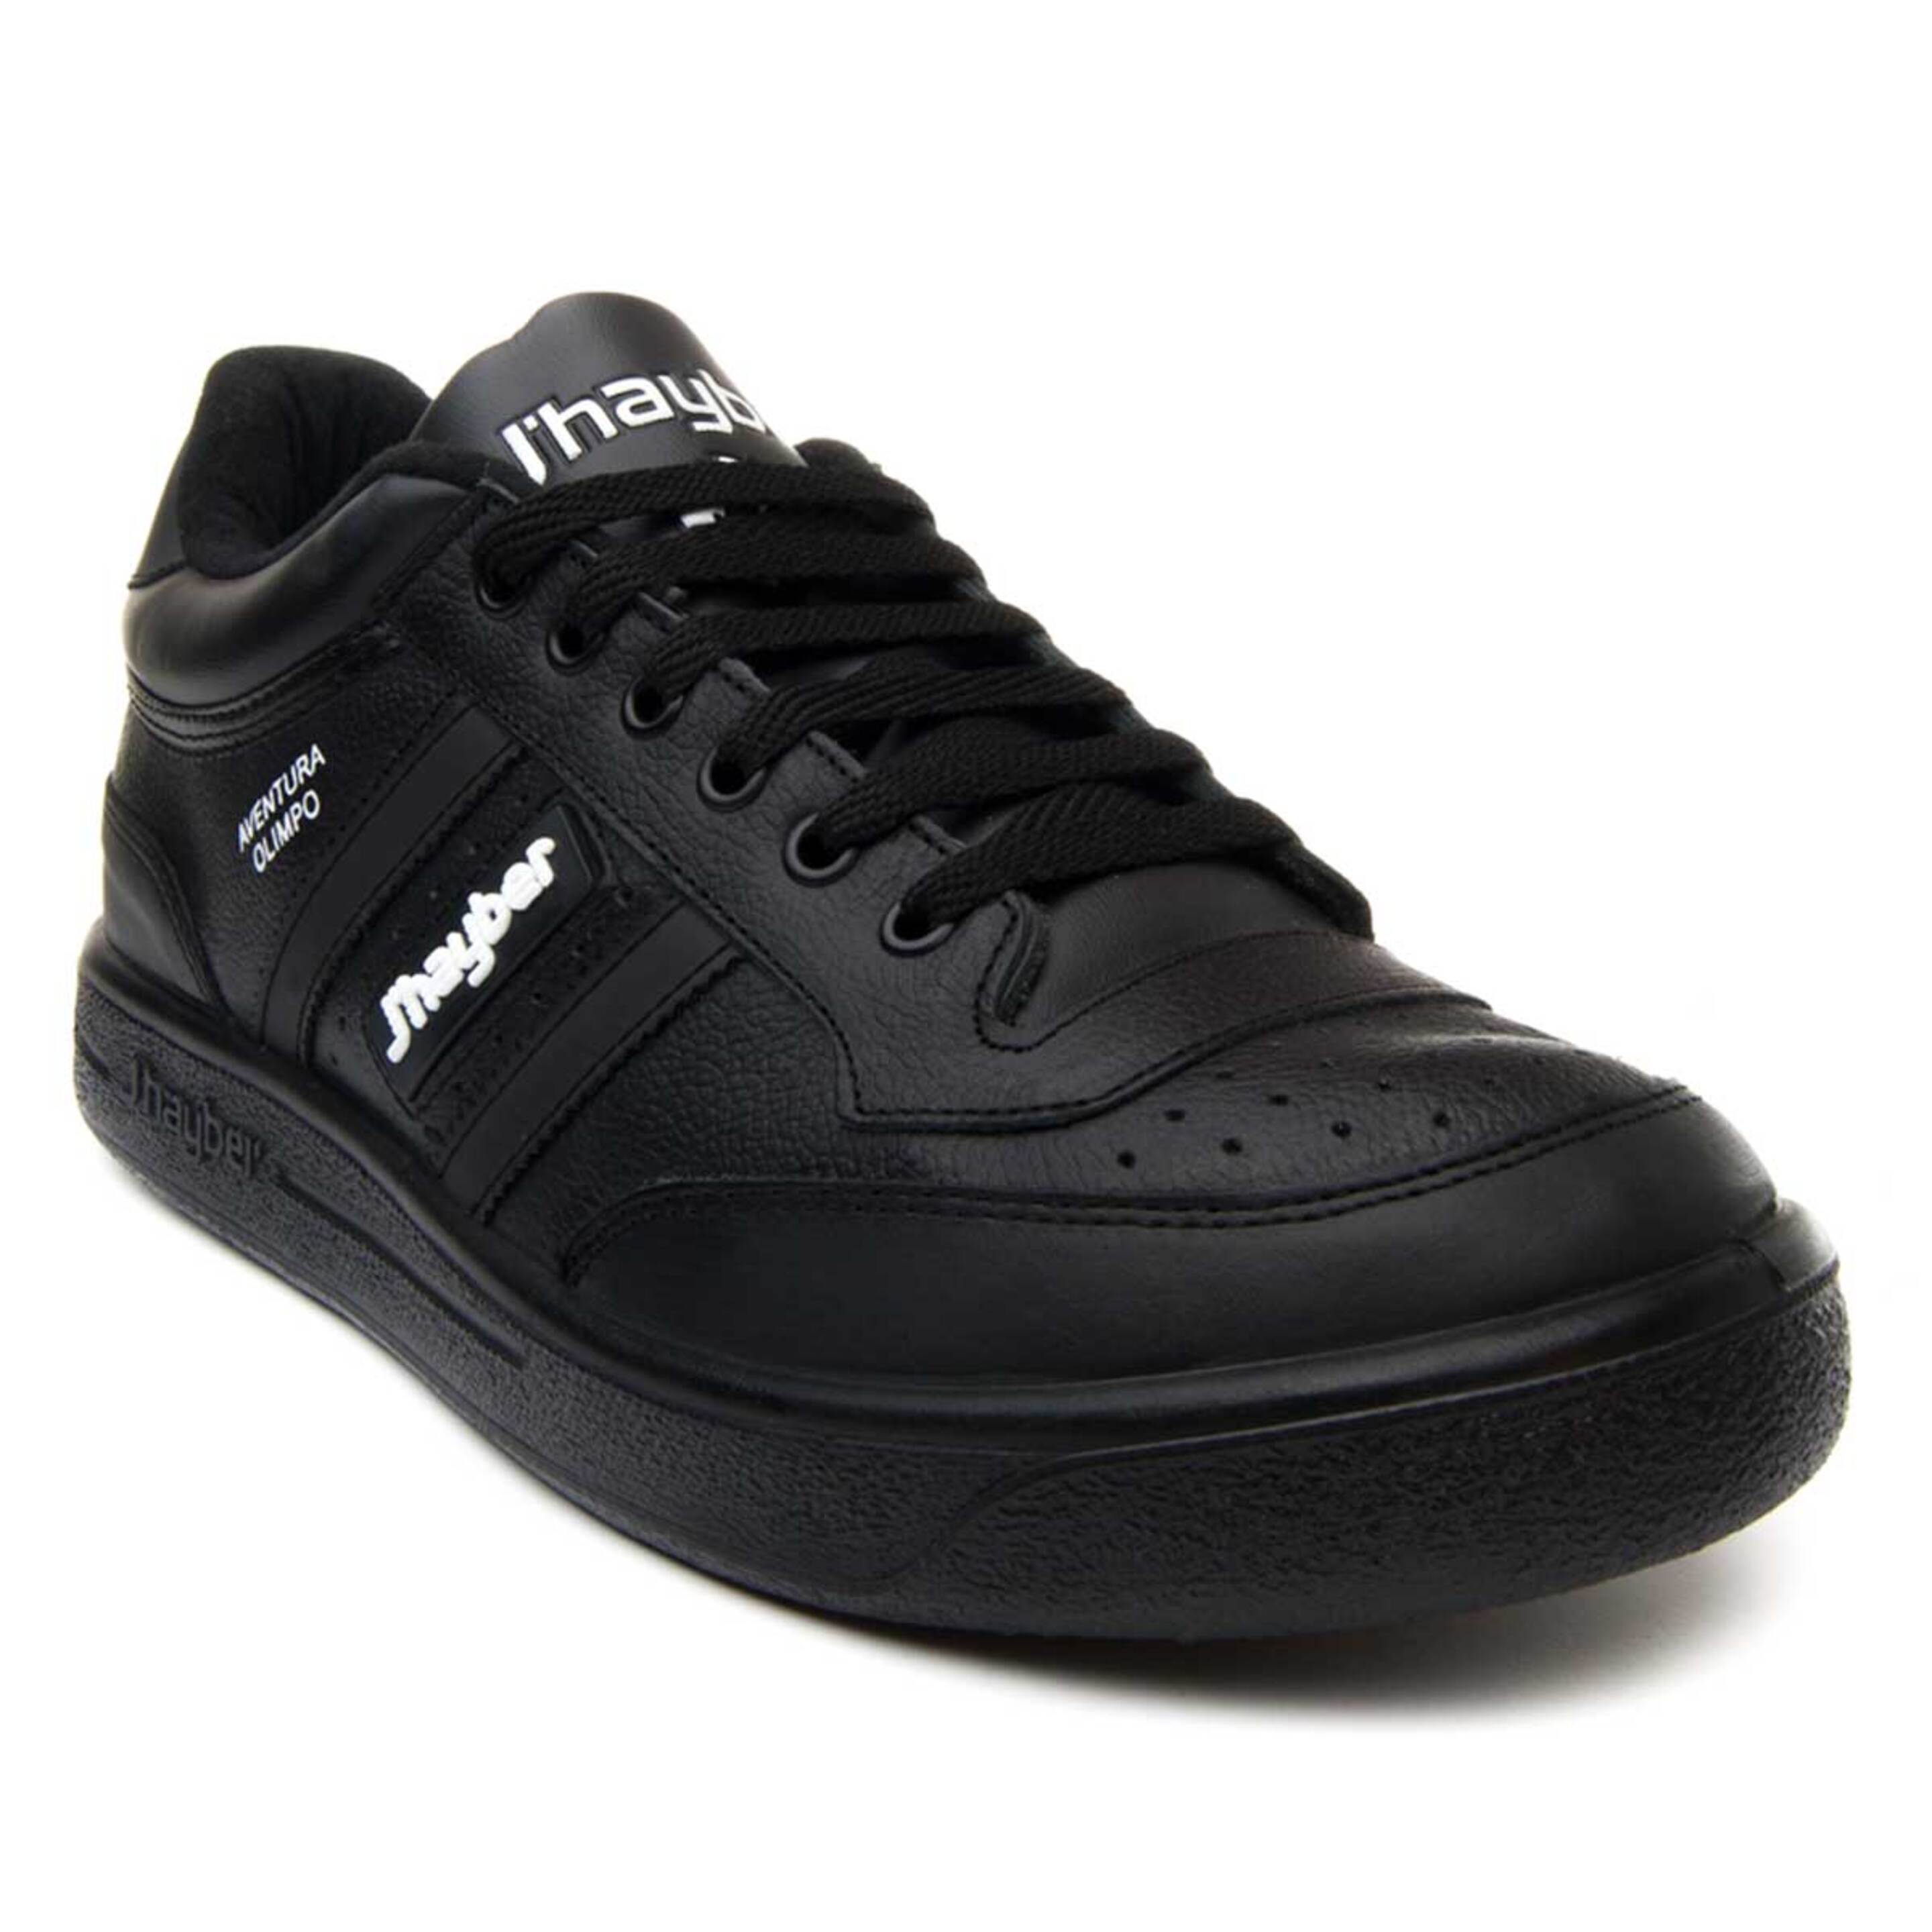 Sneaker Casual Newolimpo J'hayber